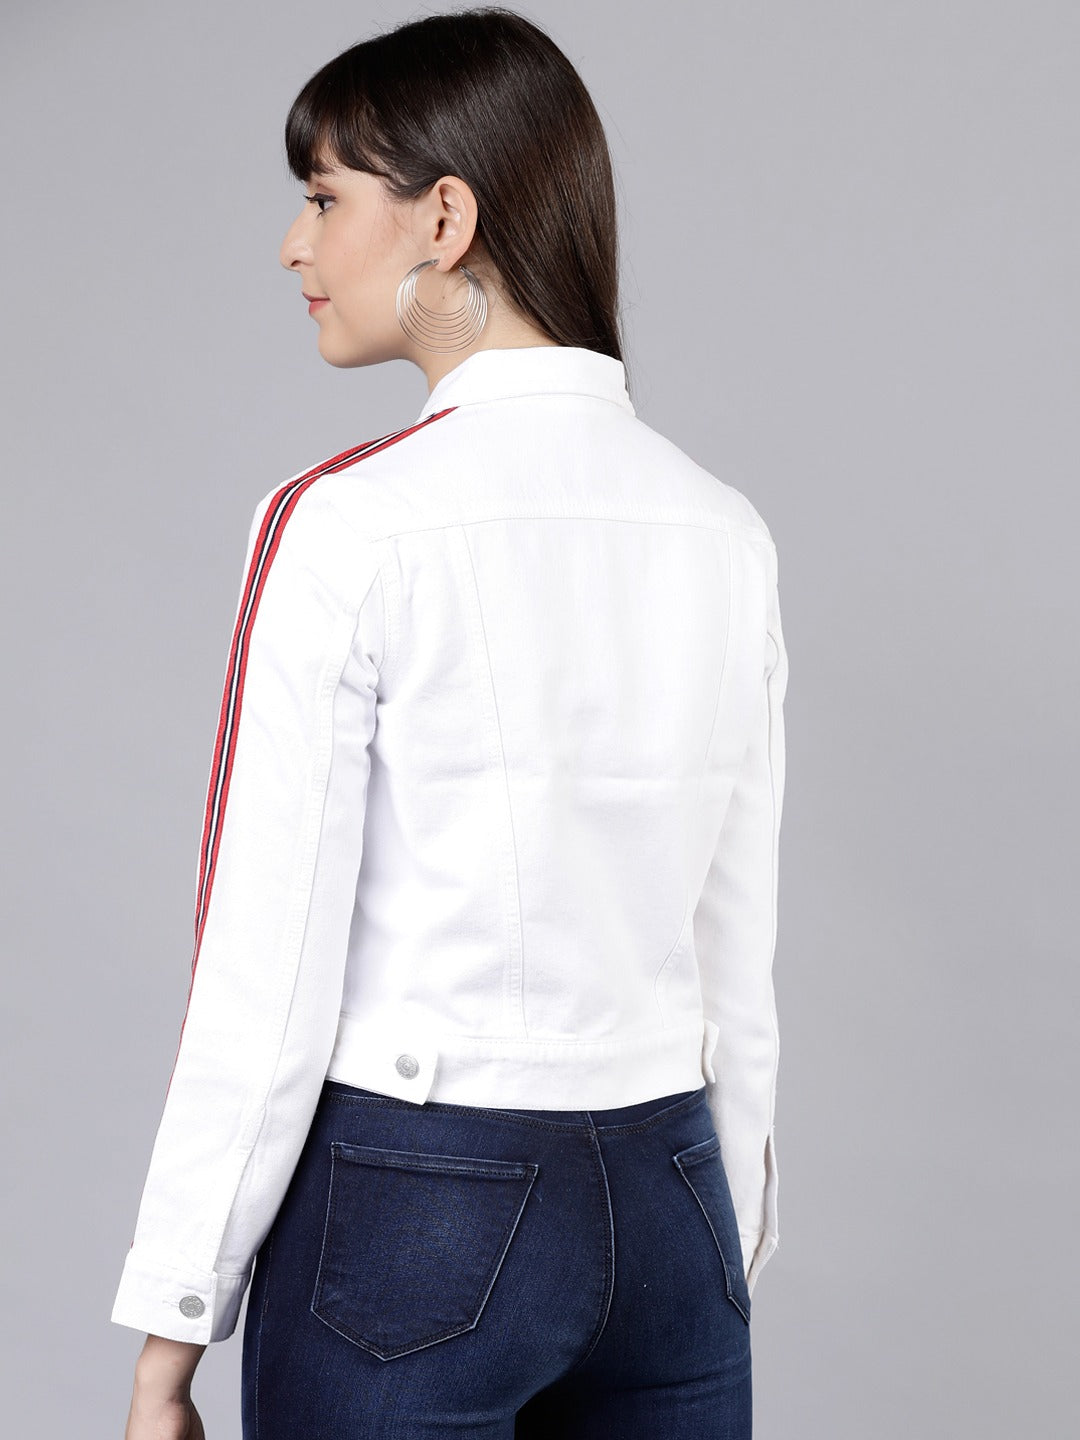 Fashionable white denim jacket with red stripe detail on Ace Cart store